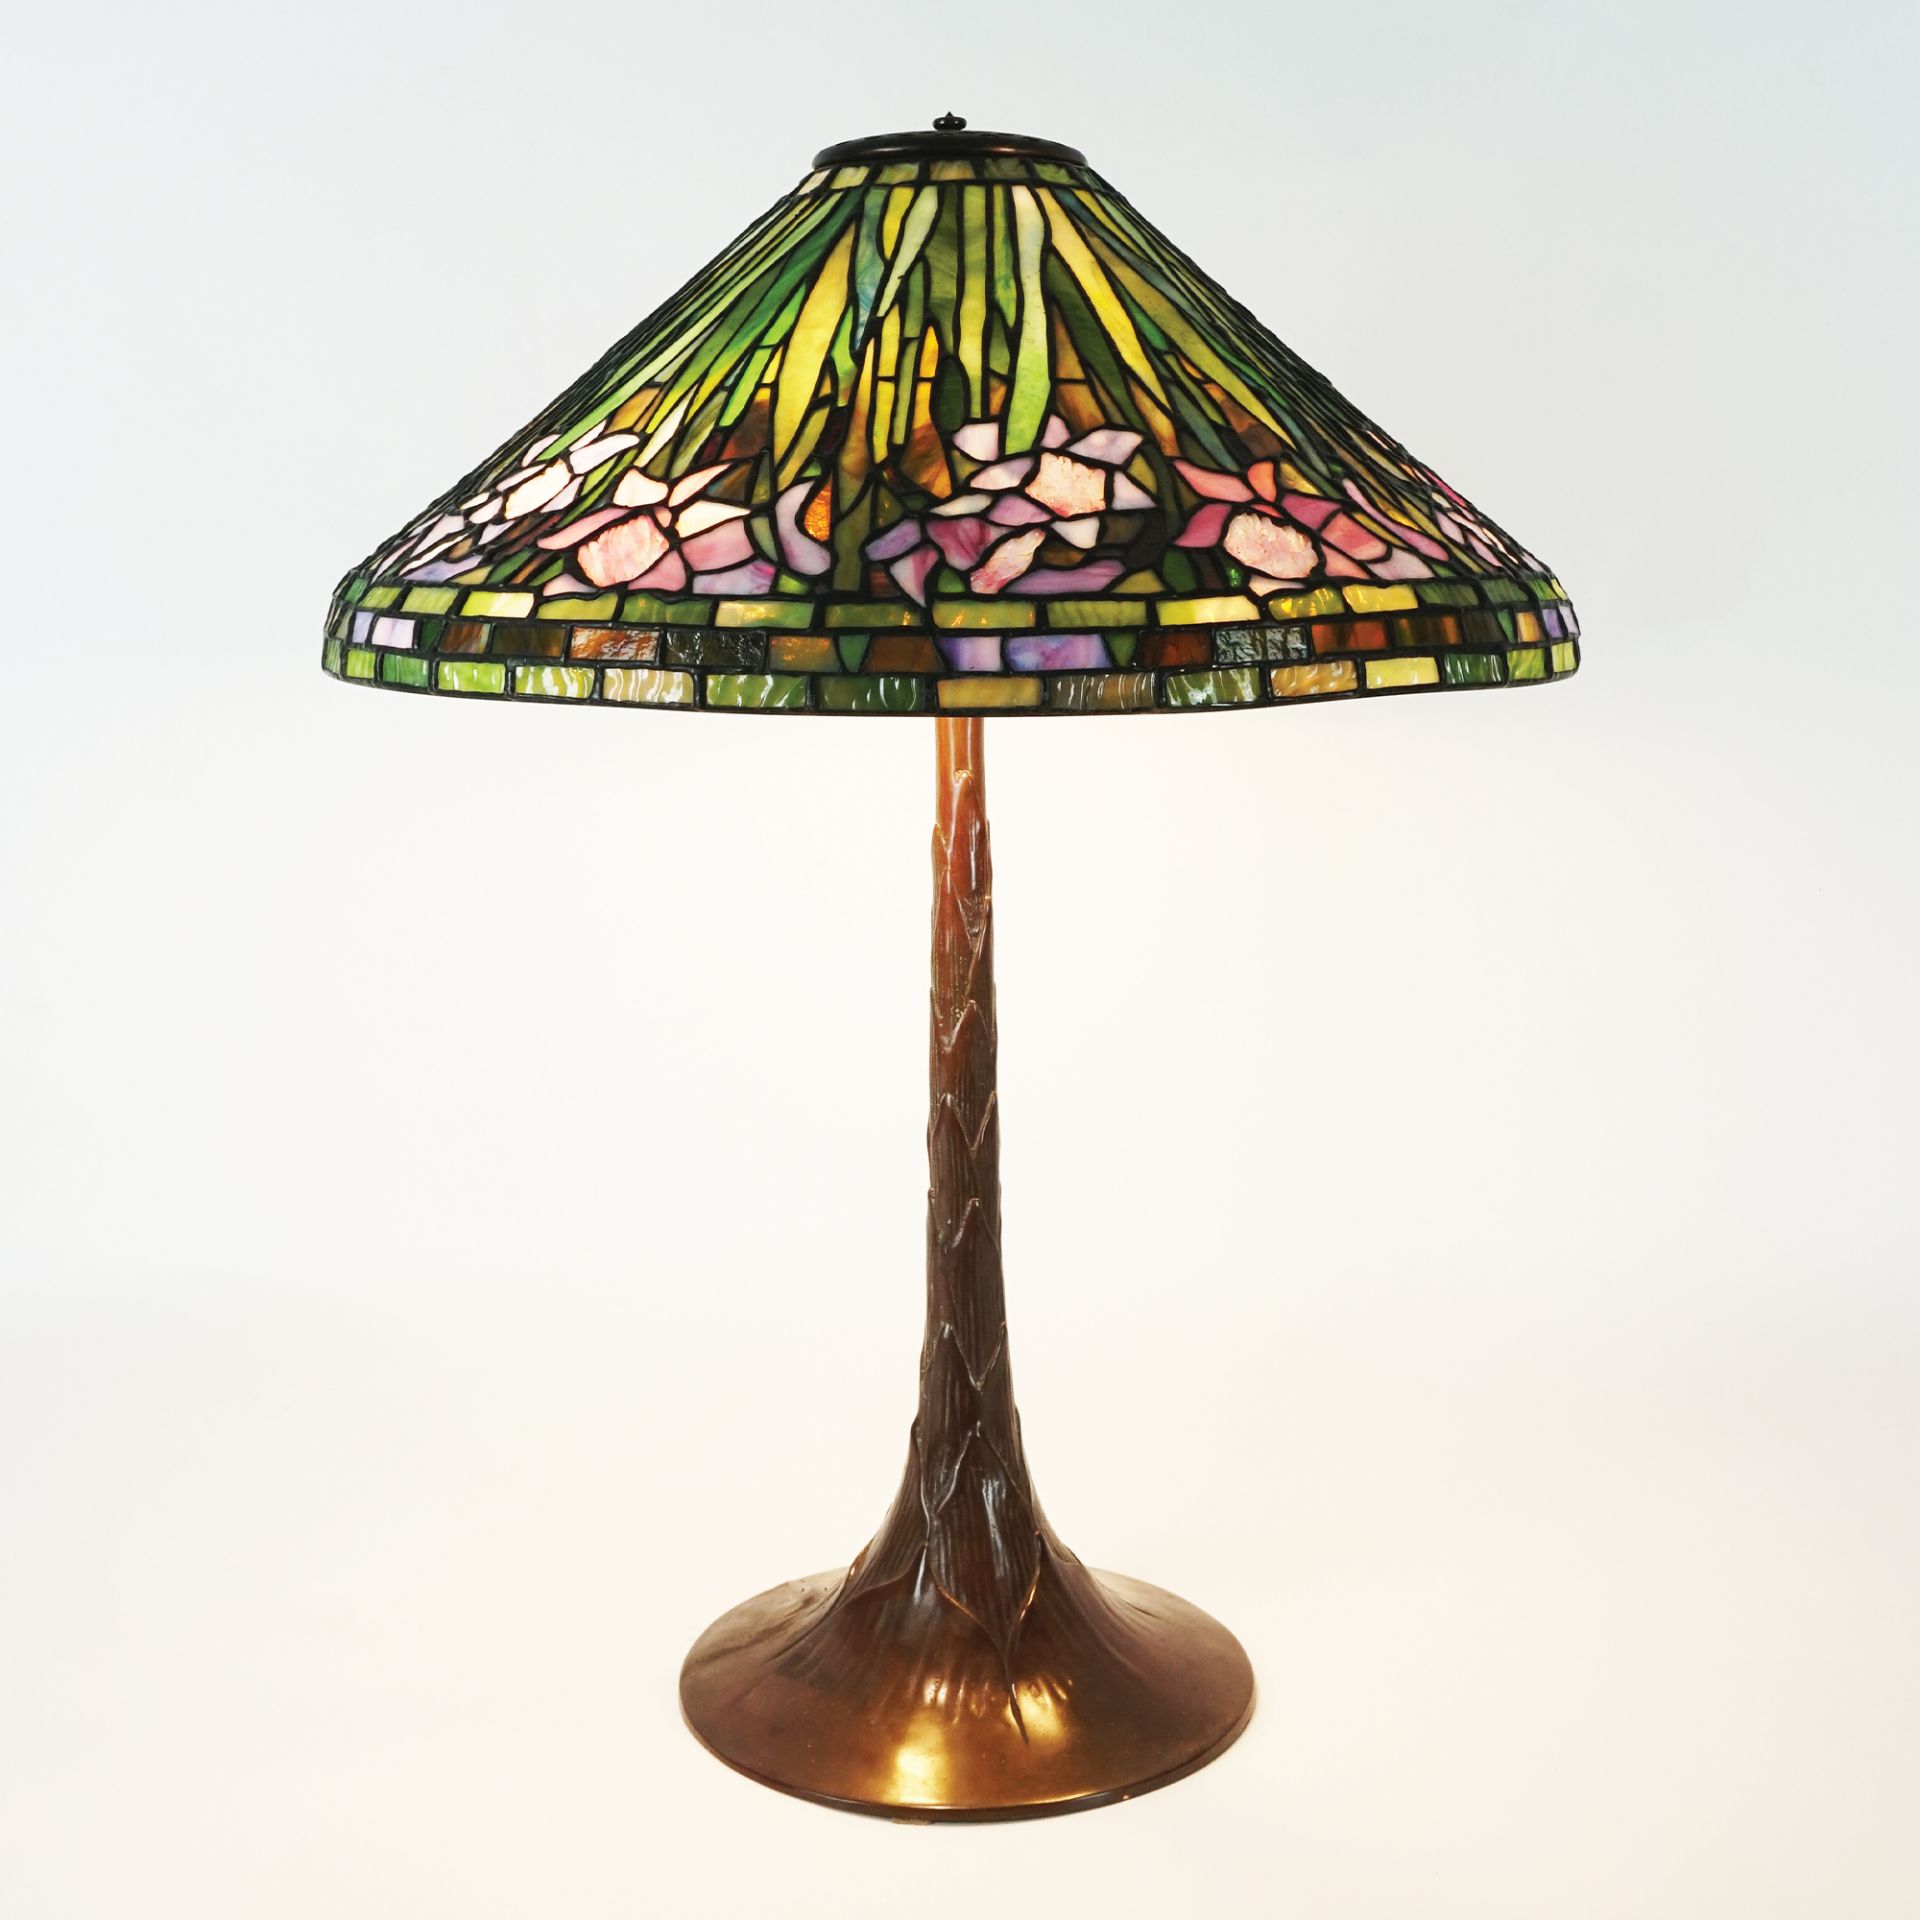 A patinated bronze and glass paste table lamp, Art Nouveau